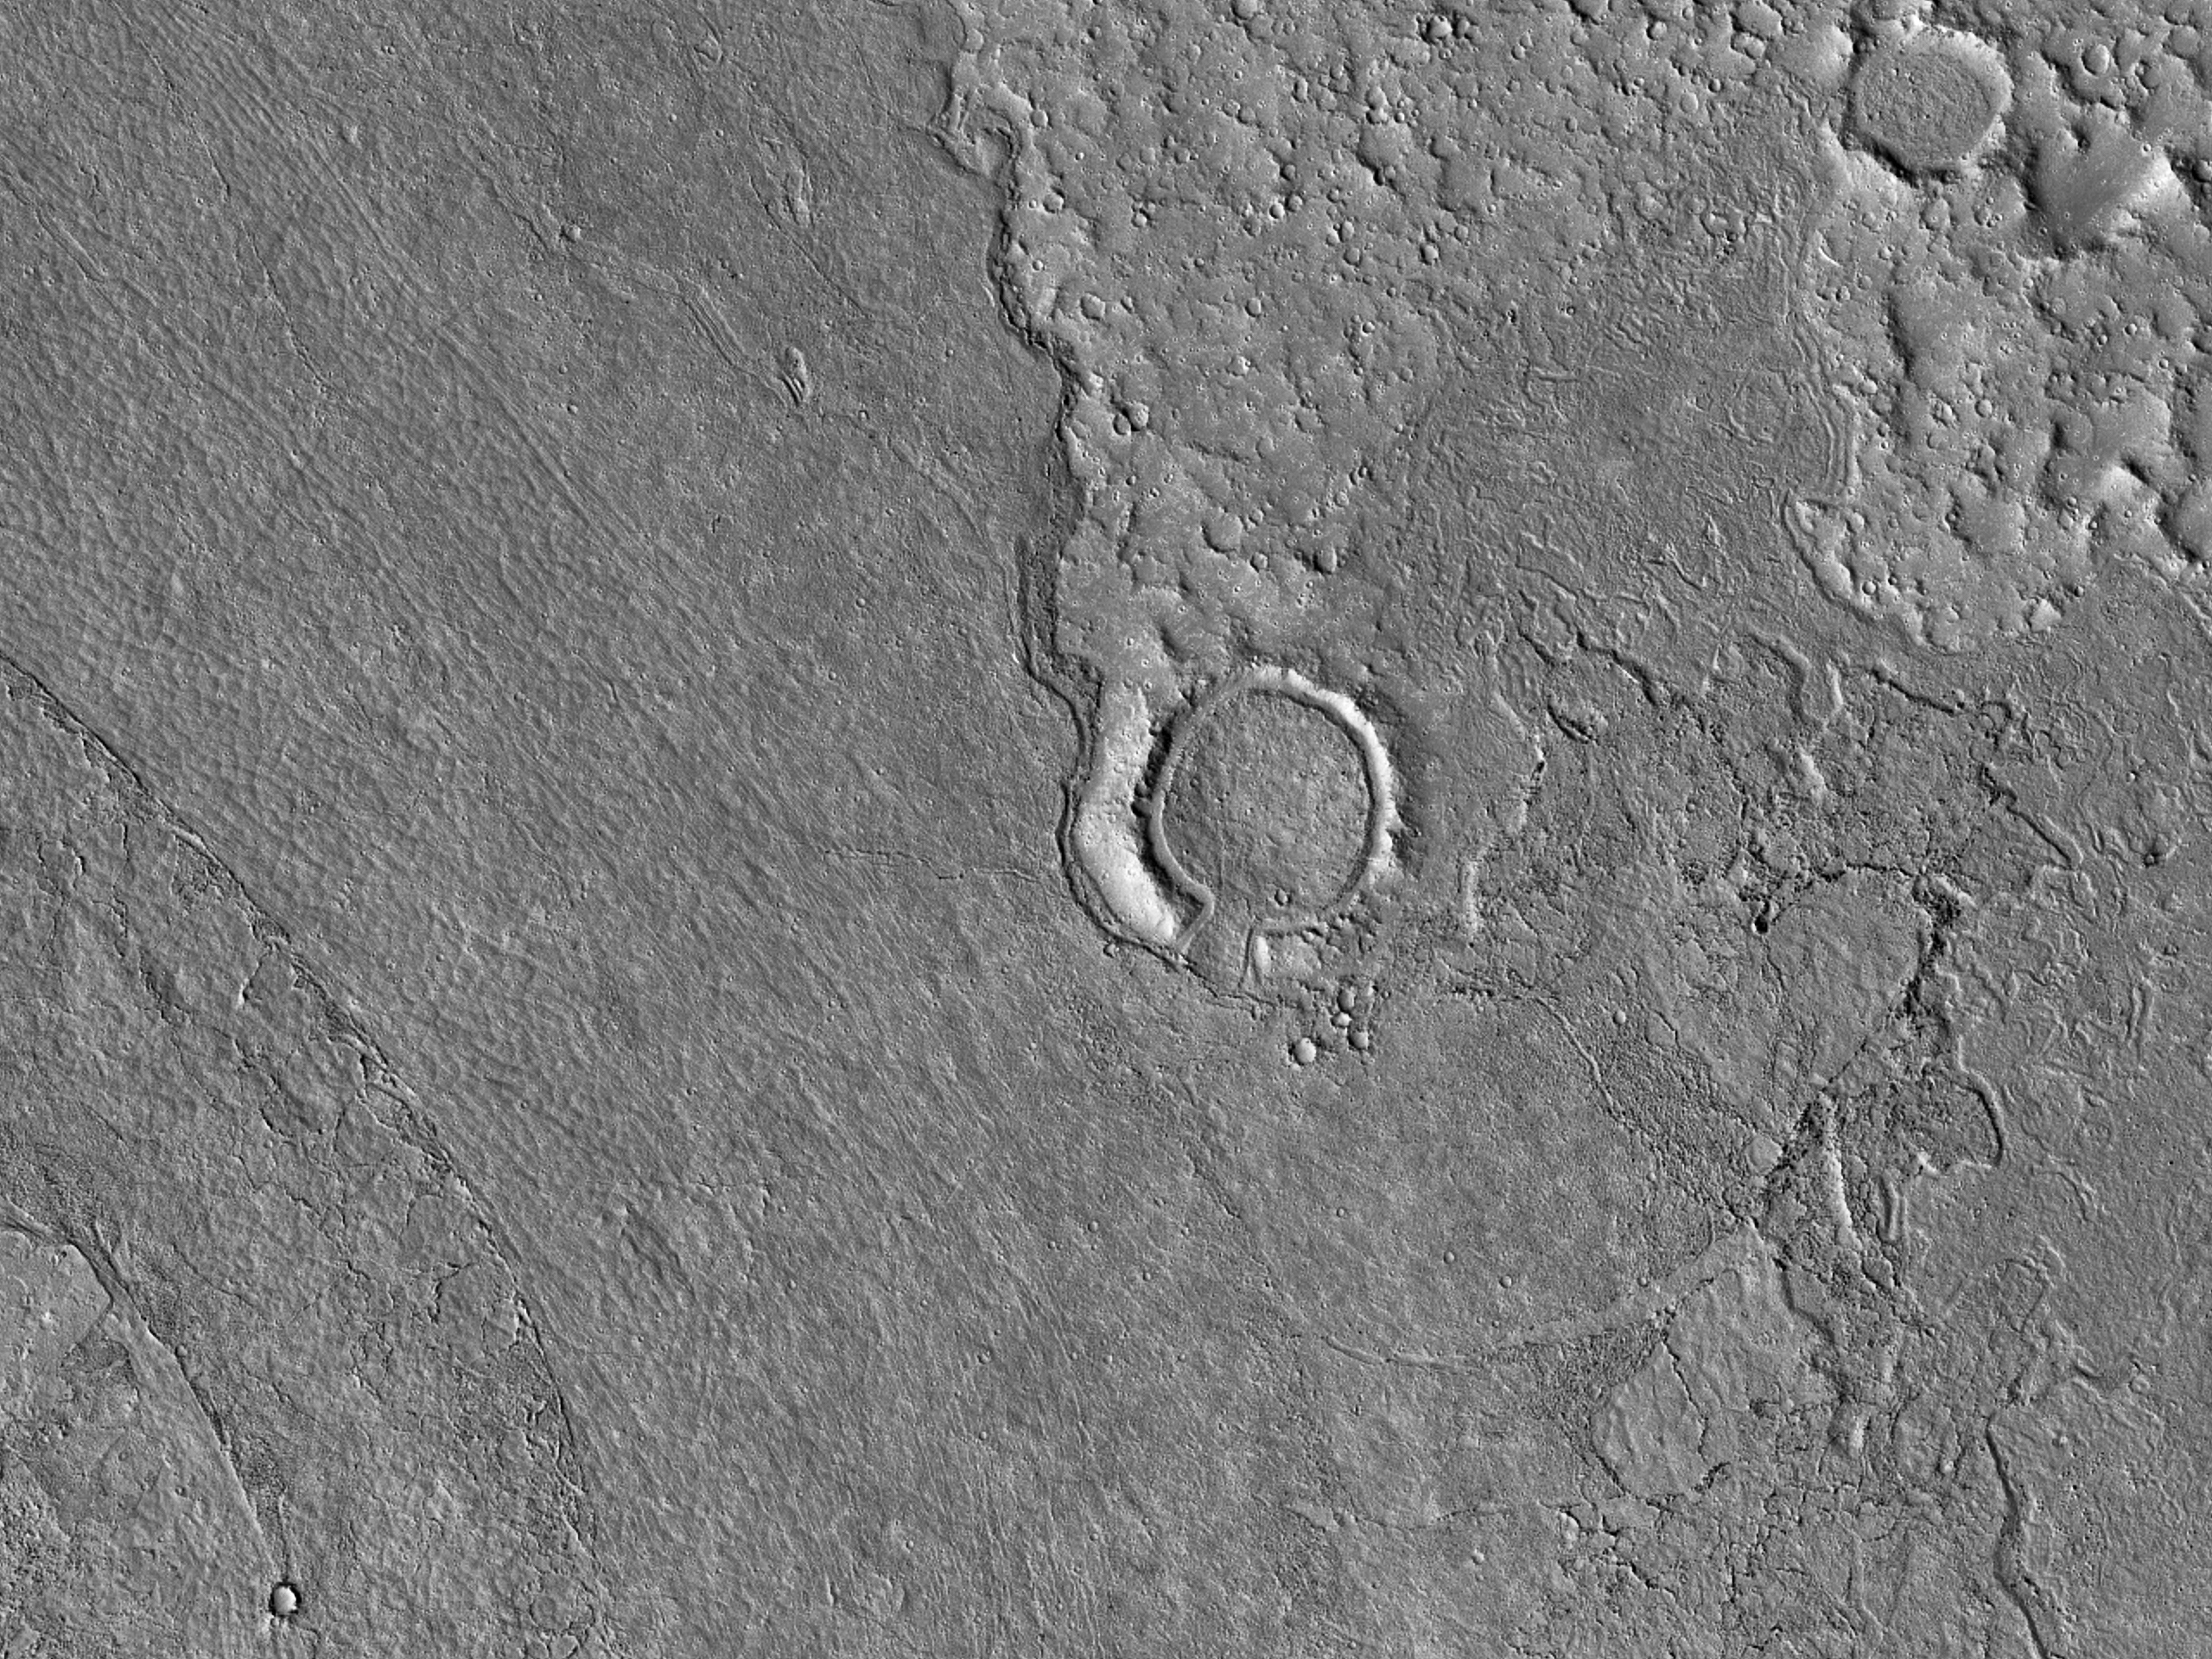 A Lava-Filled Crater near Athabasca Valles